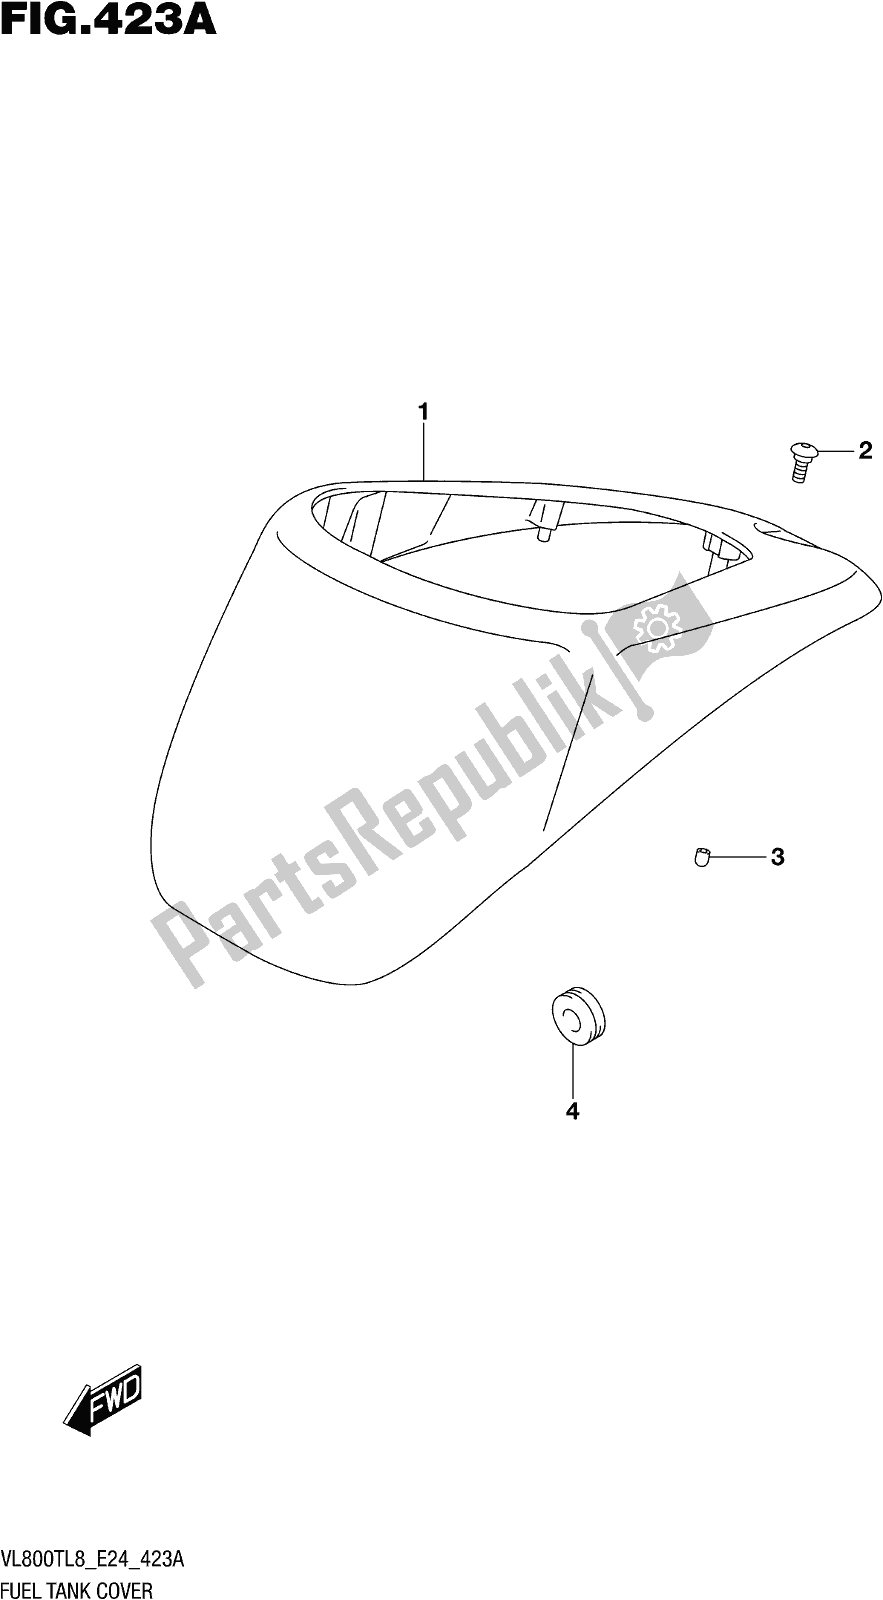 All parts for the Fig. 423a Fuel Tank Cover of the Suzuki VL 800T 2018